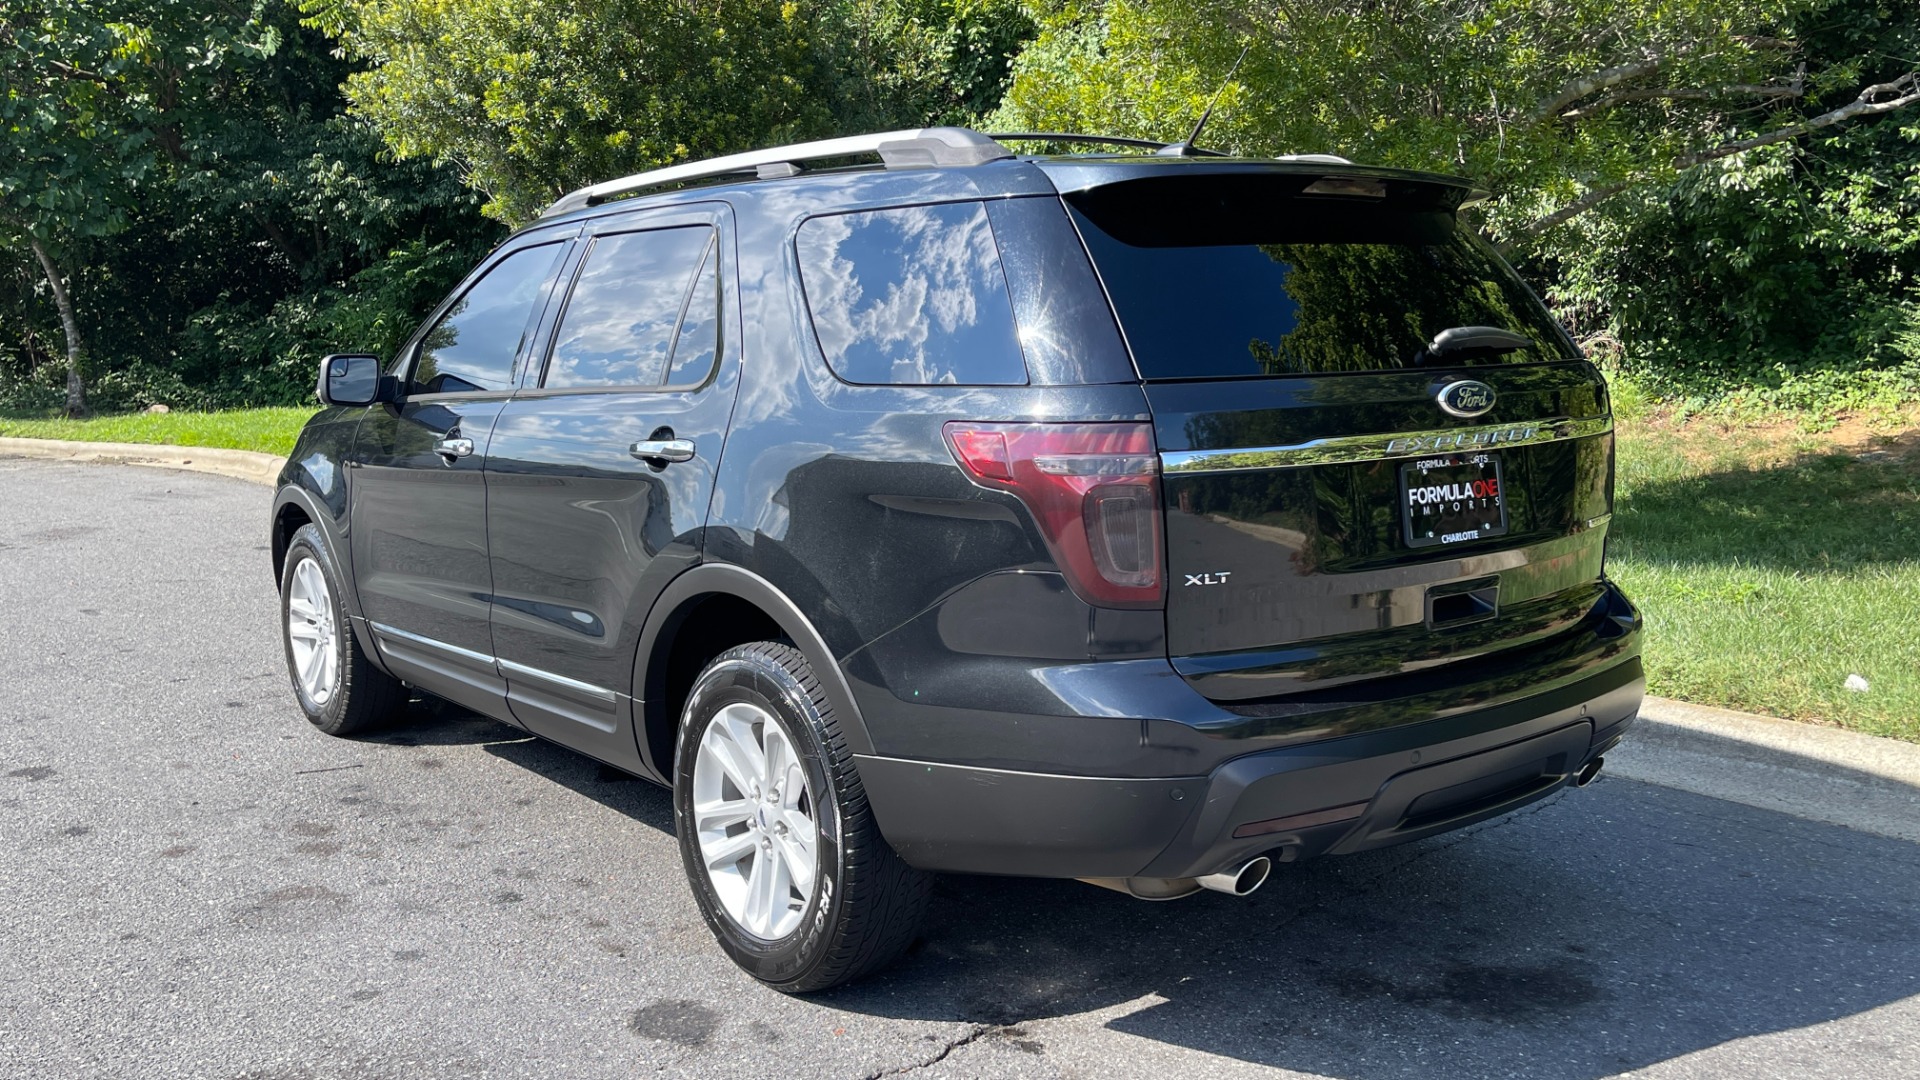 Used 2013 Ford Explorer XLT / LEATHER / COMFORT PACKAGE / 3.5 V6 / REAR VIEW CAMERA / DRIVER CONNEC for sale $13,995 at Formula Imports in Charlotte NC 28227 7